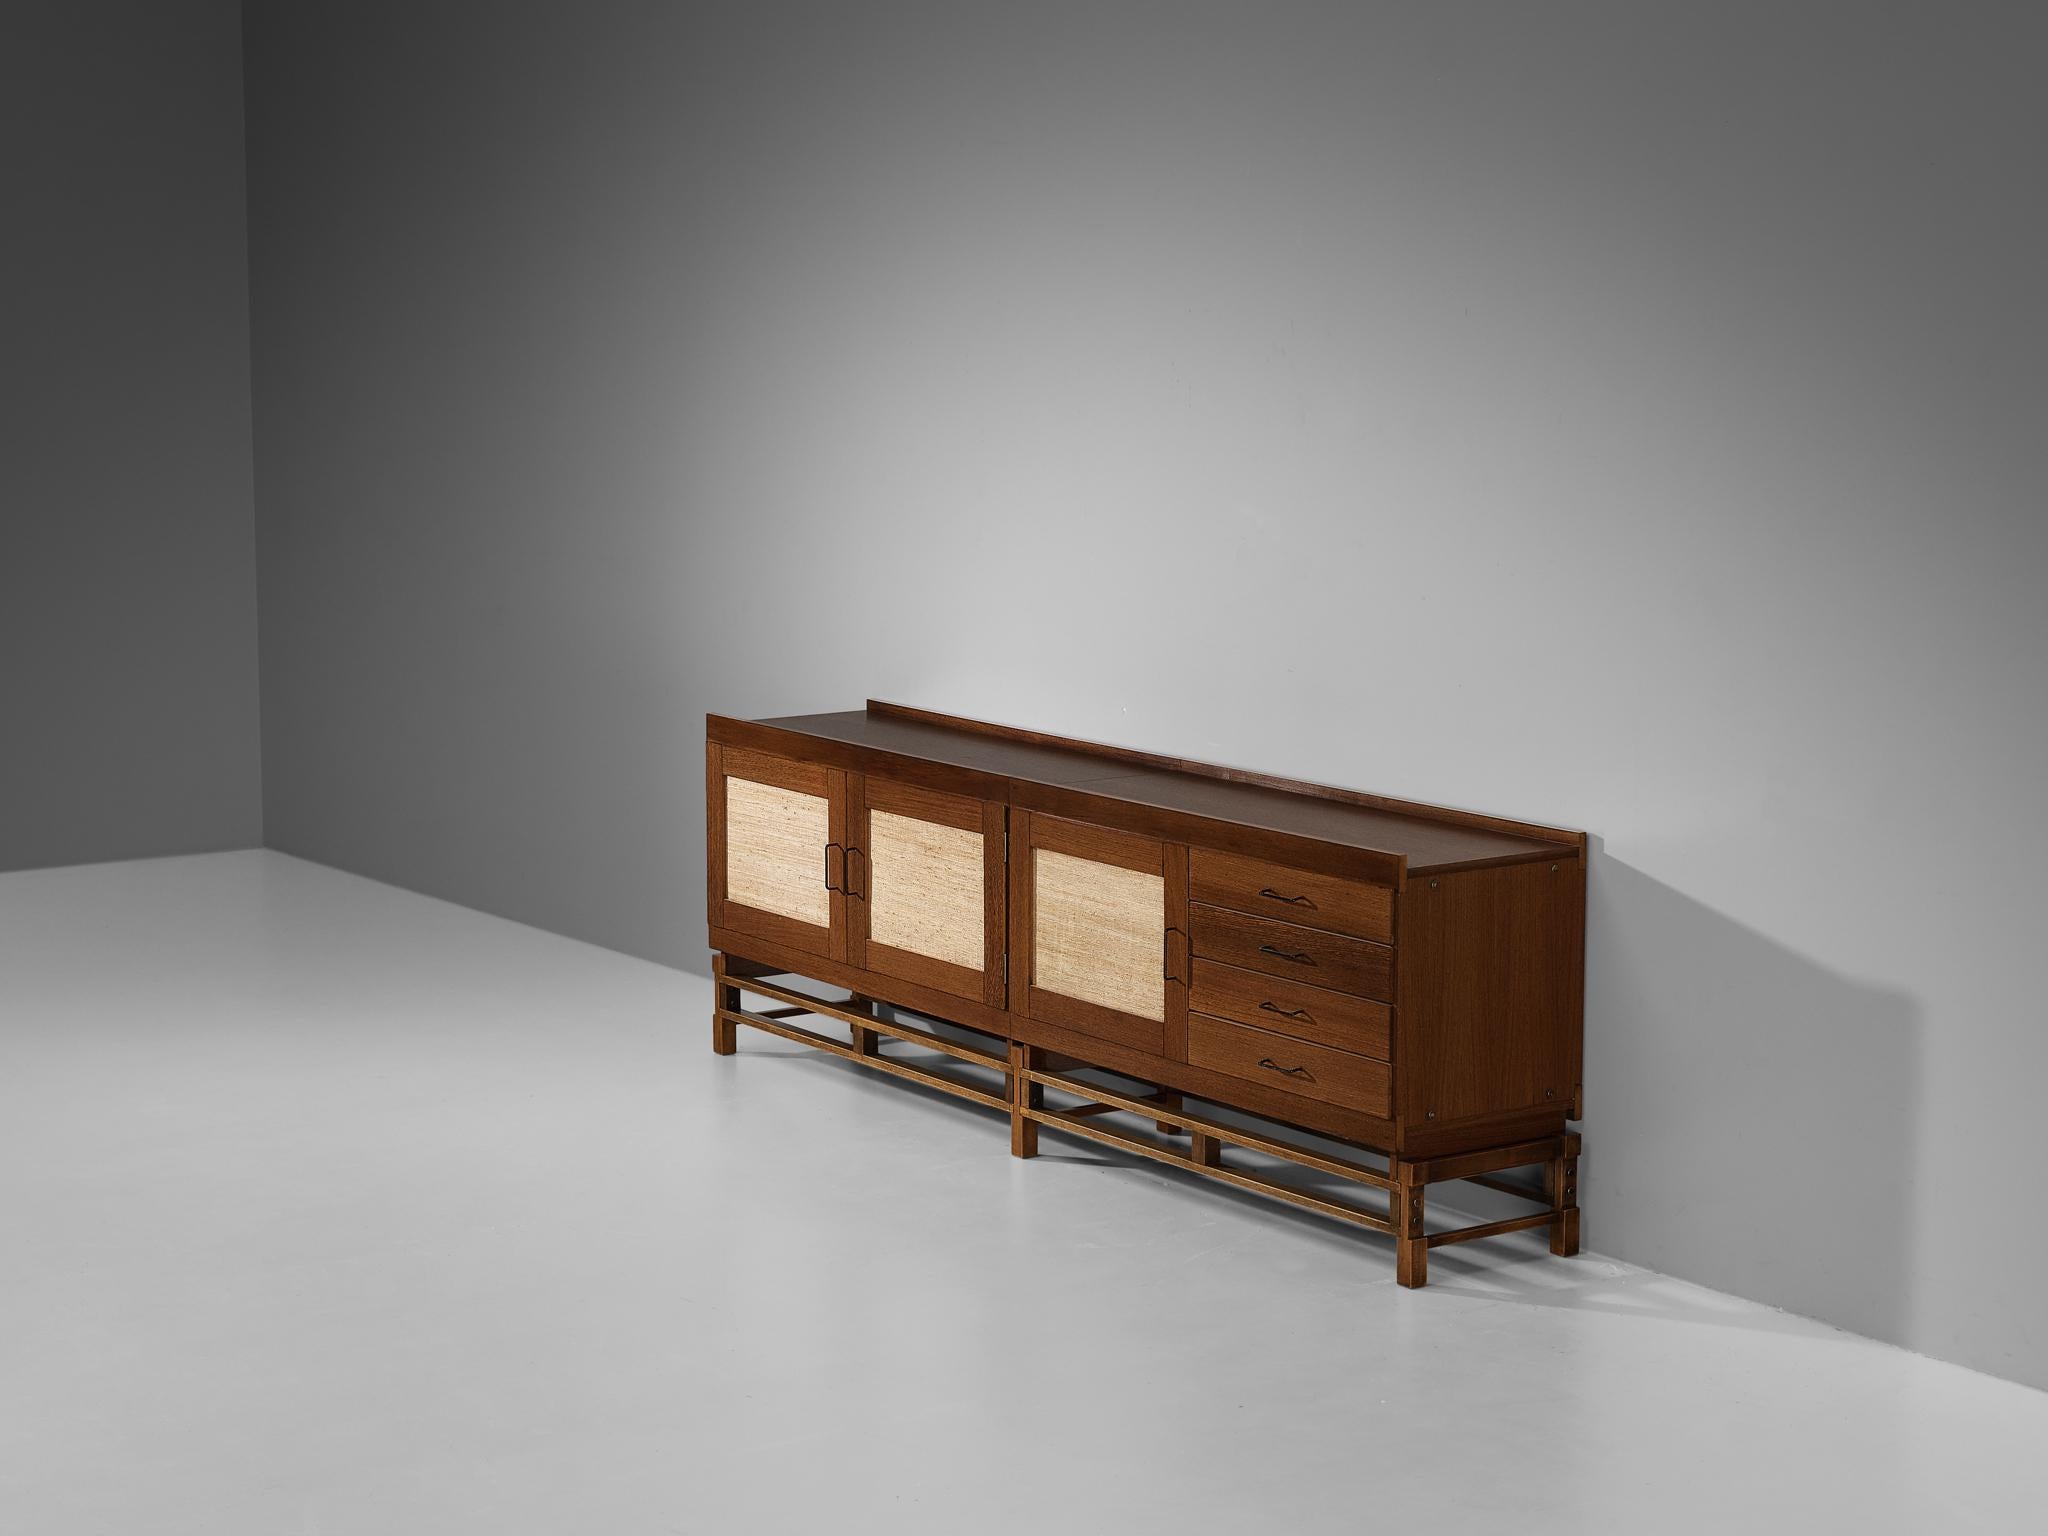 Leonardo Fiori for ISA Bergamo, sideboard, wengé, seagrass, steel, brass, Italy, 1950s

Beautiful cabinet designed by Leonardo Fiori for ISA Bergamo. The combination of the wengé and the refined woven seagrass results in an exotic and luxurious